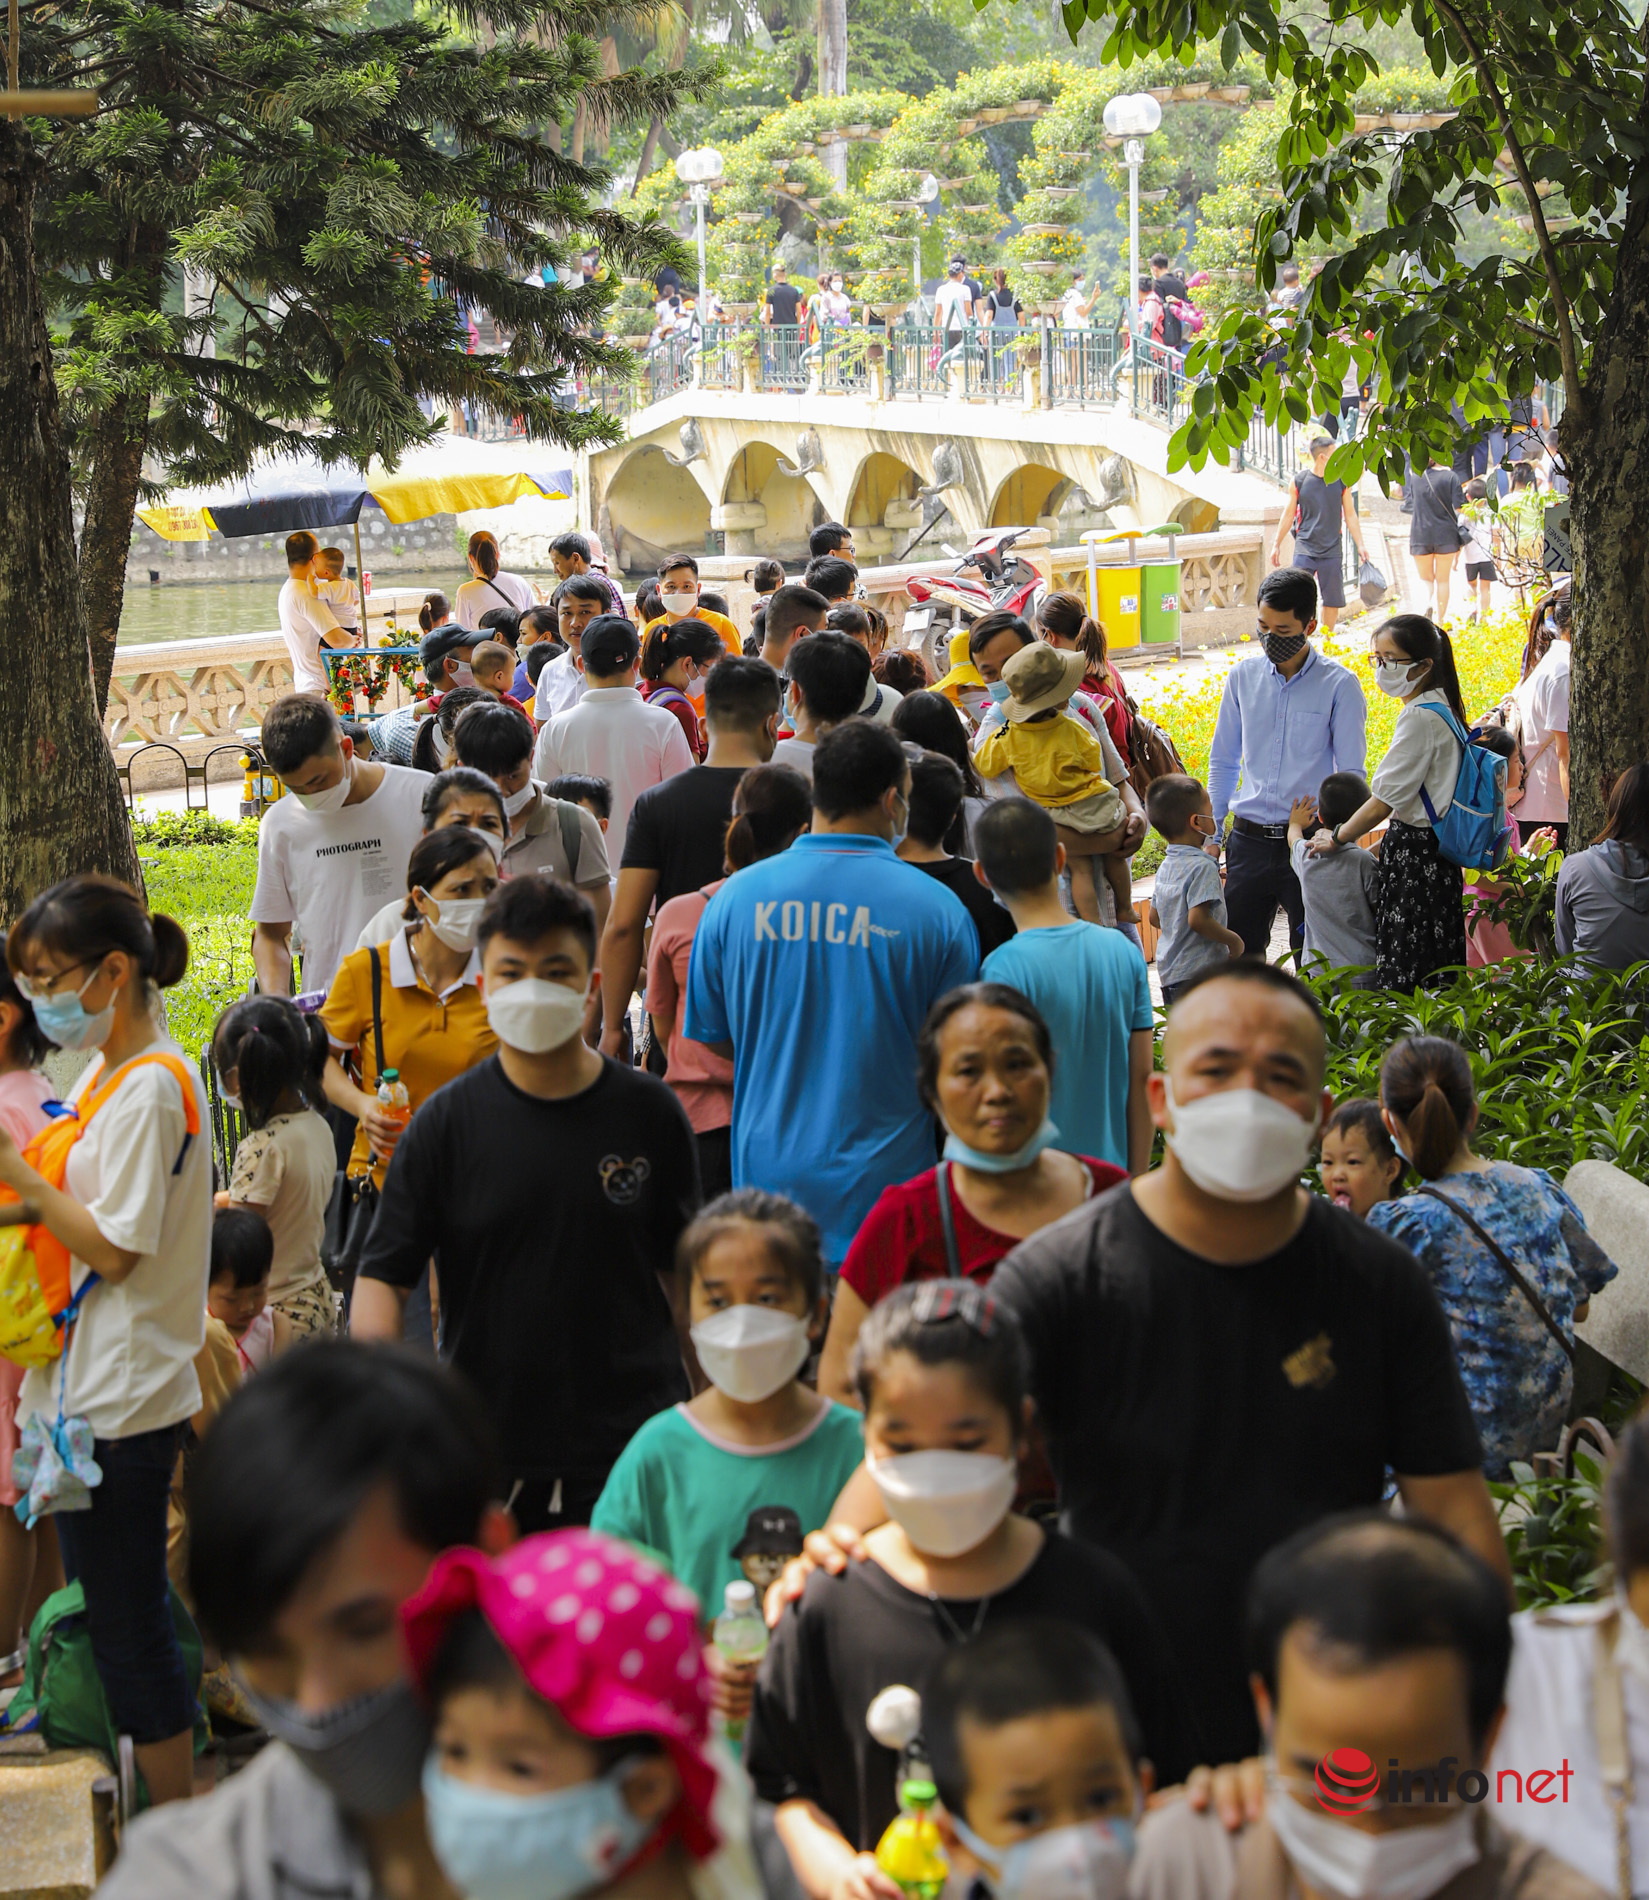 Tens of thousands of people flocked to Thu Le Park on the first public holiday